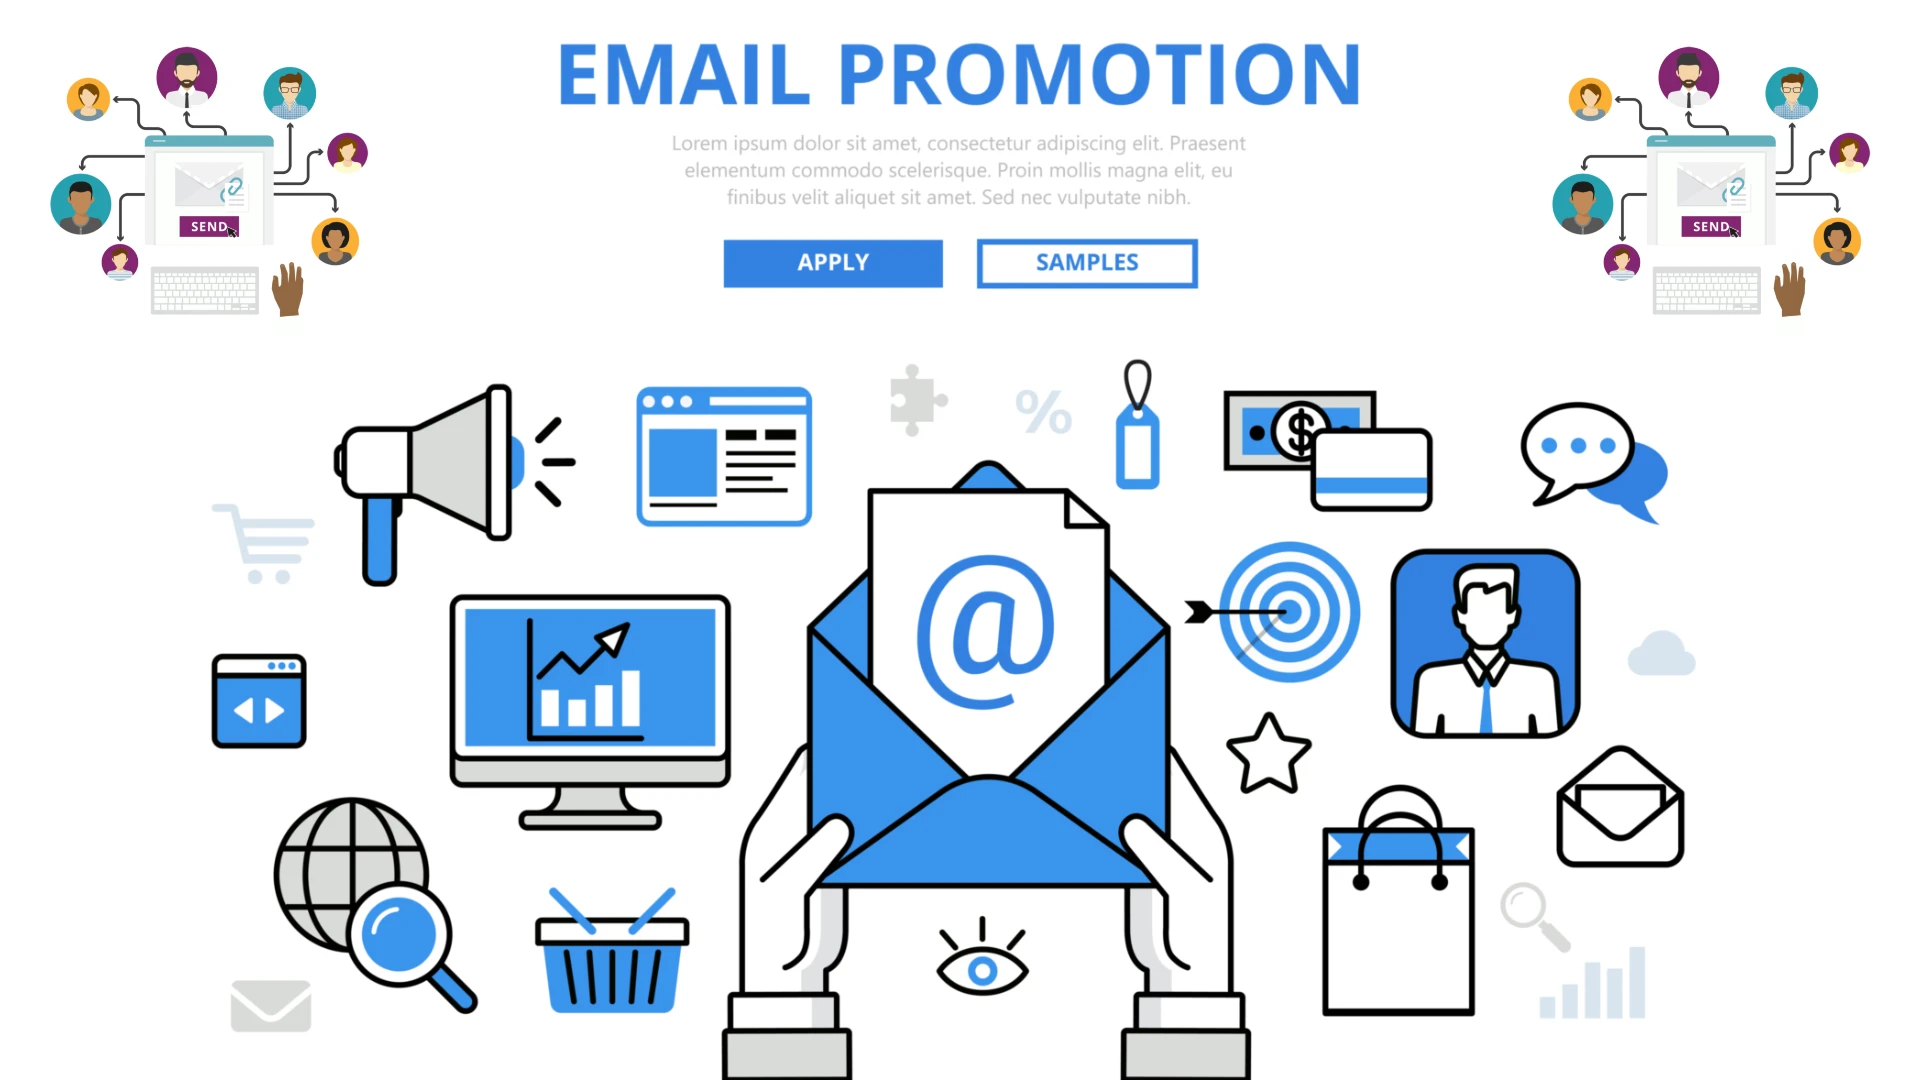 EMAIL PROMOTION SERVICE